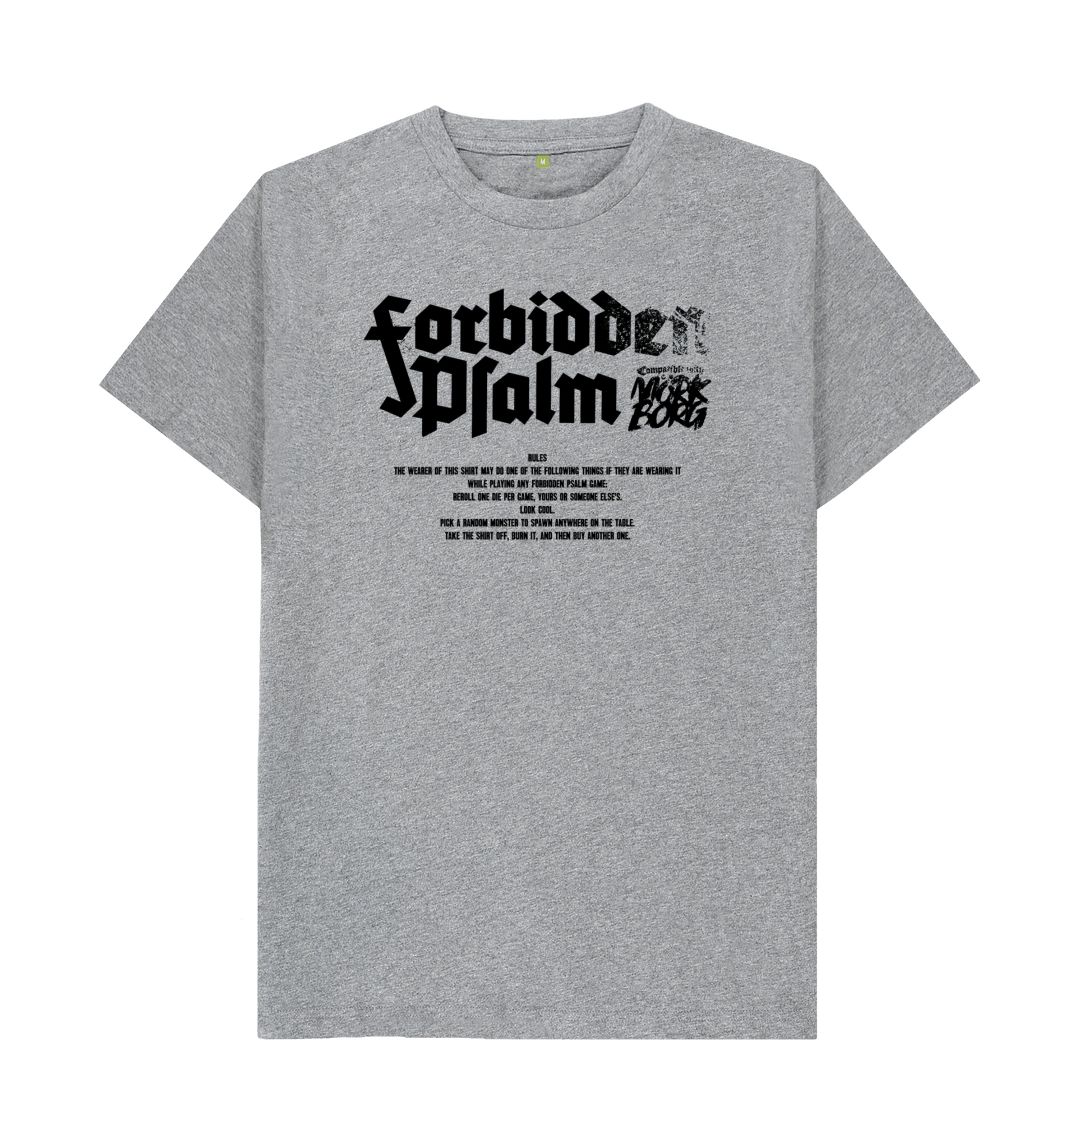 Athletic Grey Forbidden Psalm Pay to Win Standard Cut Shirt on Light Colors